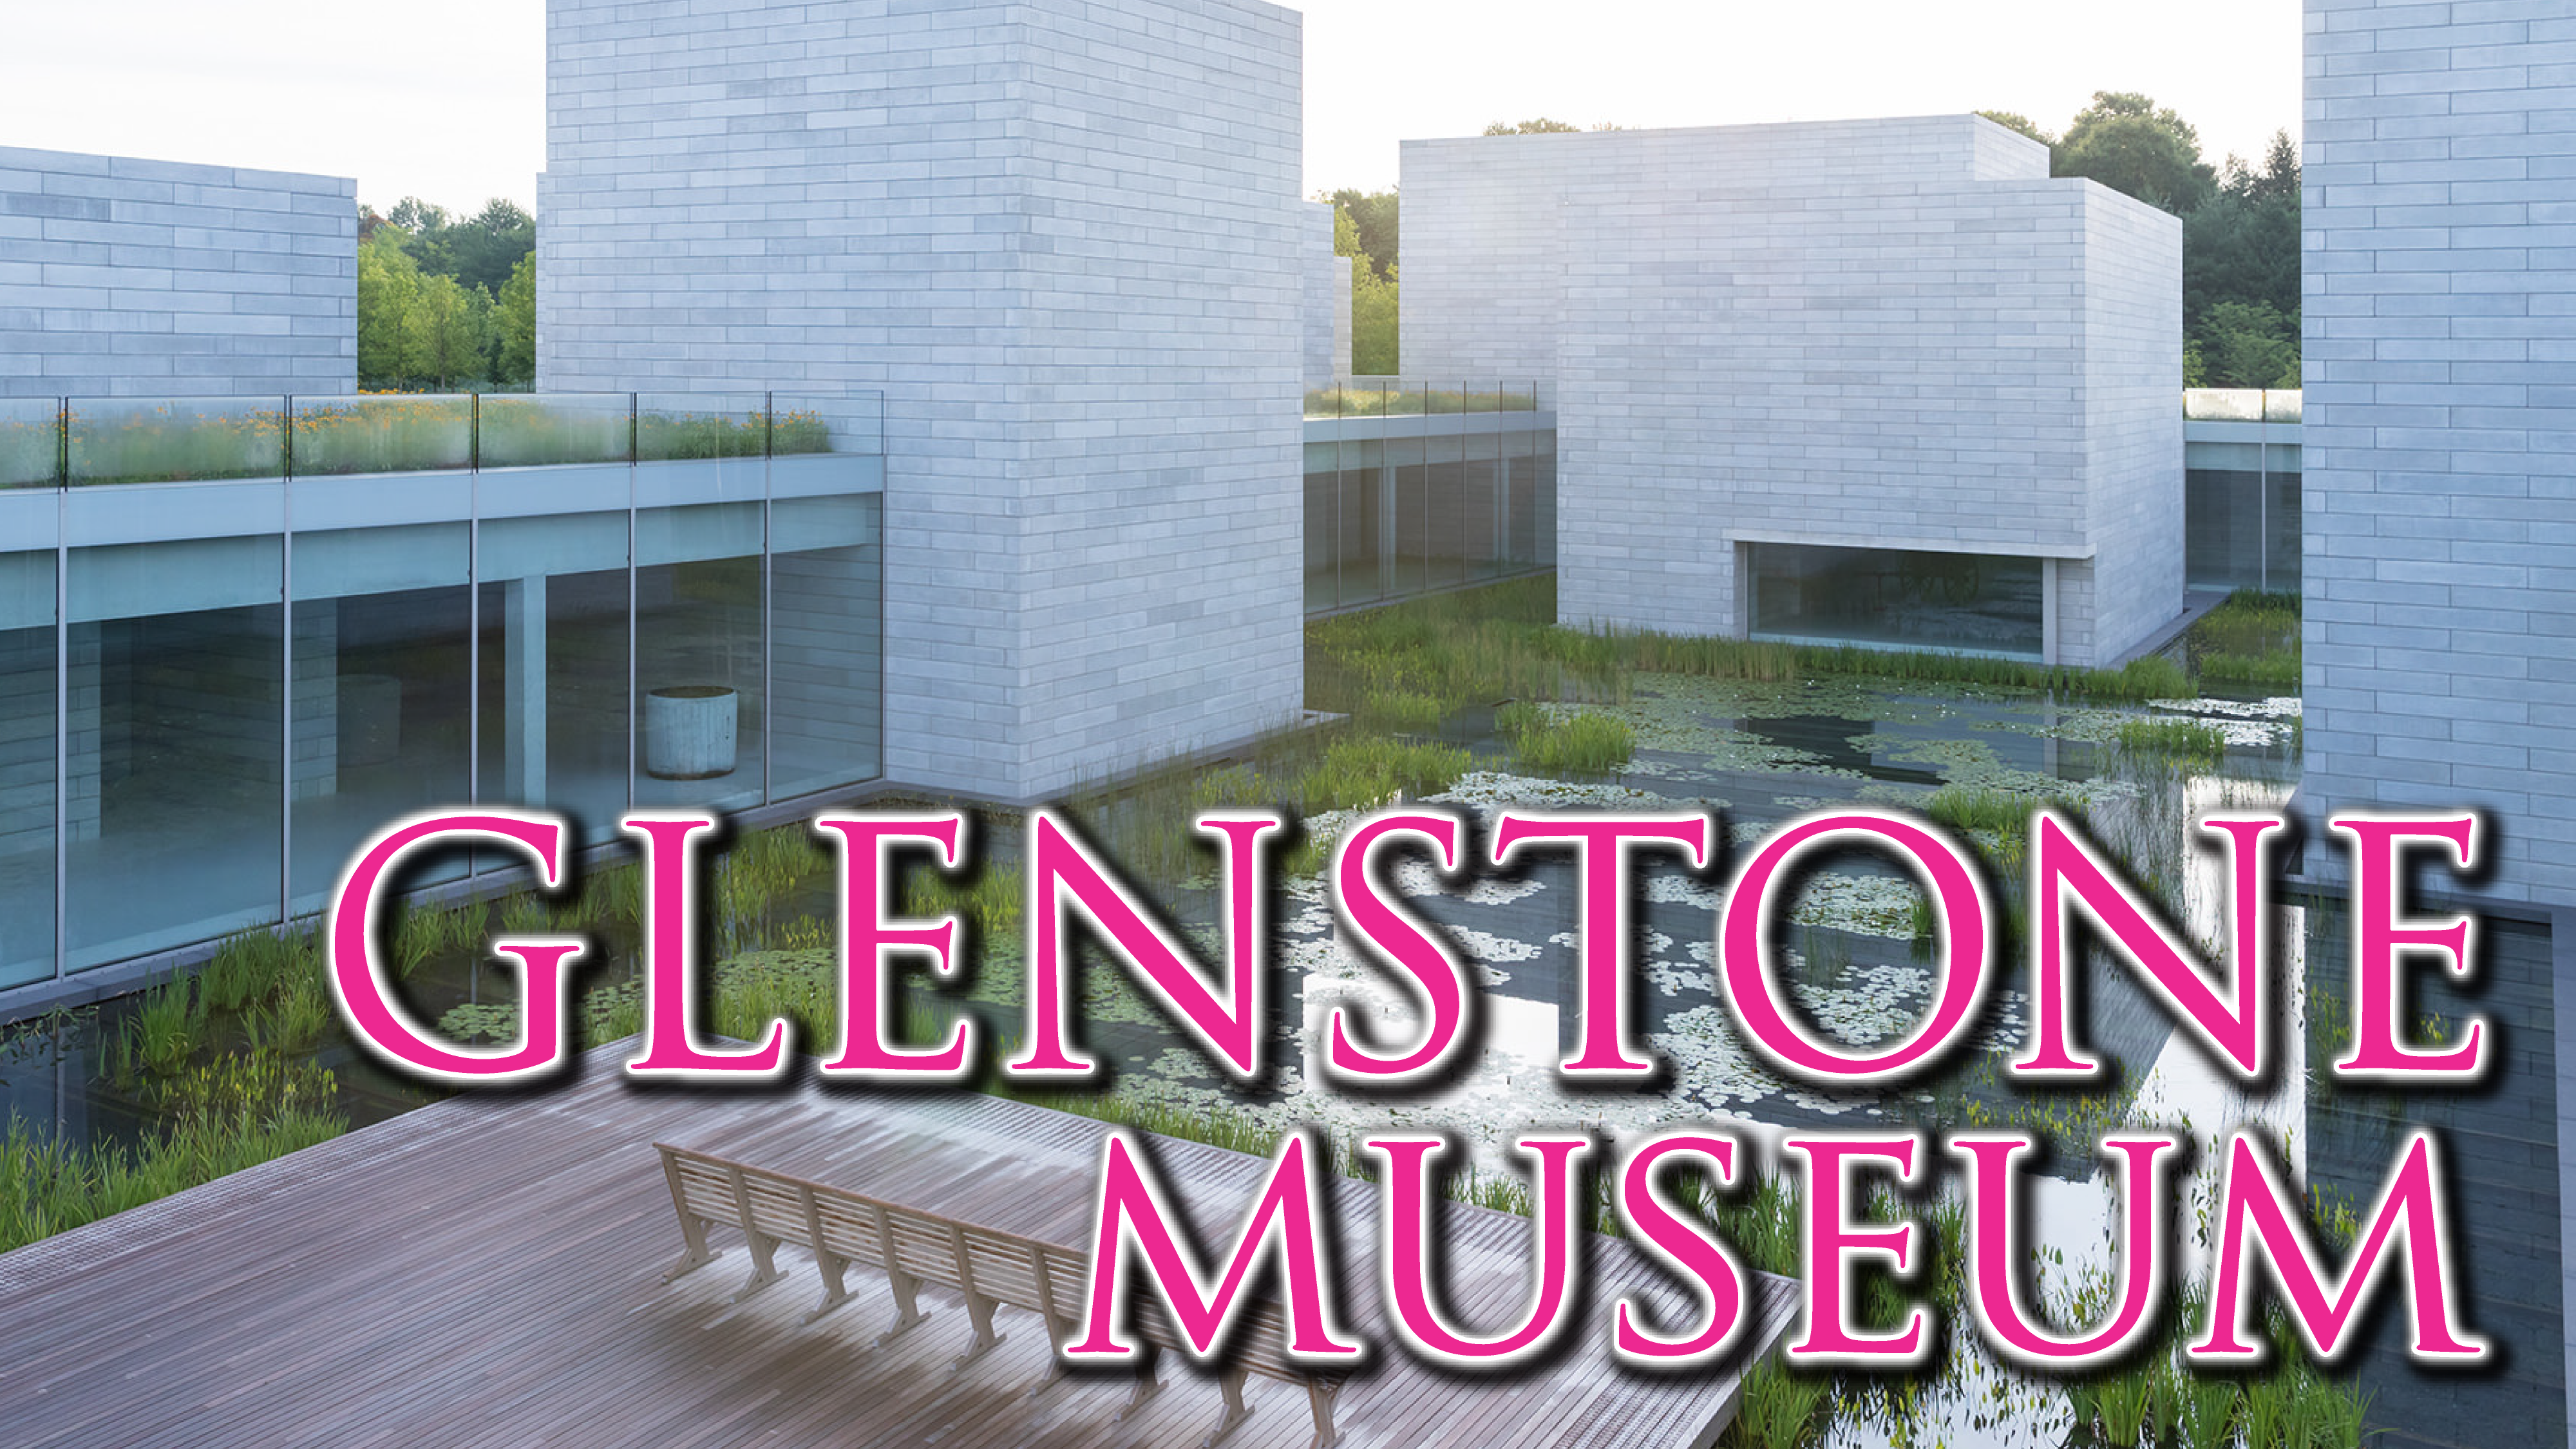 Graphic depicting Glenstone Museum and pond advertising our event for April.